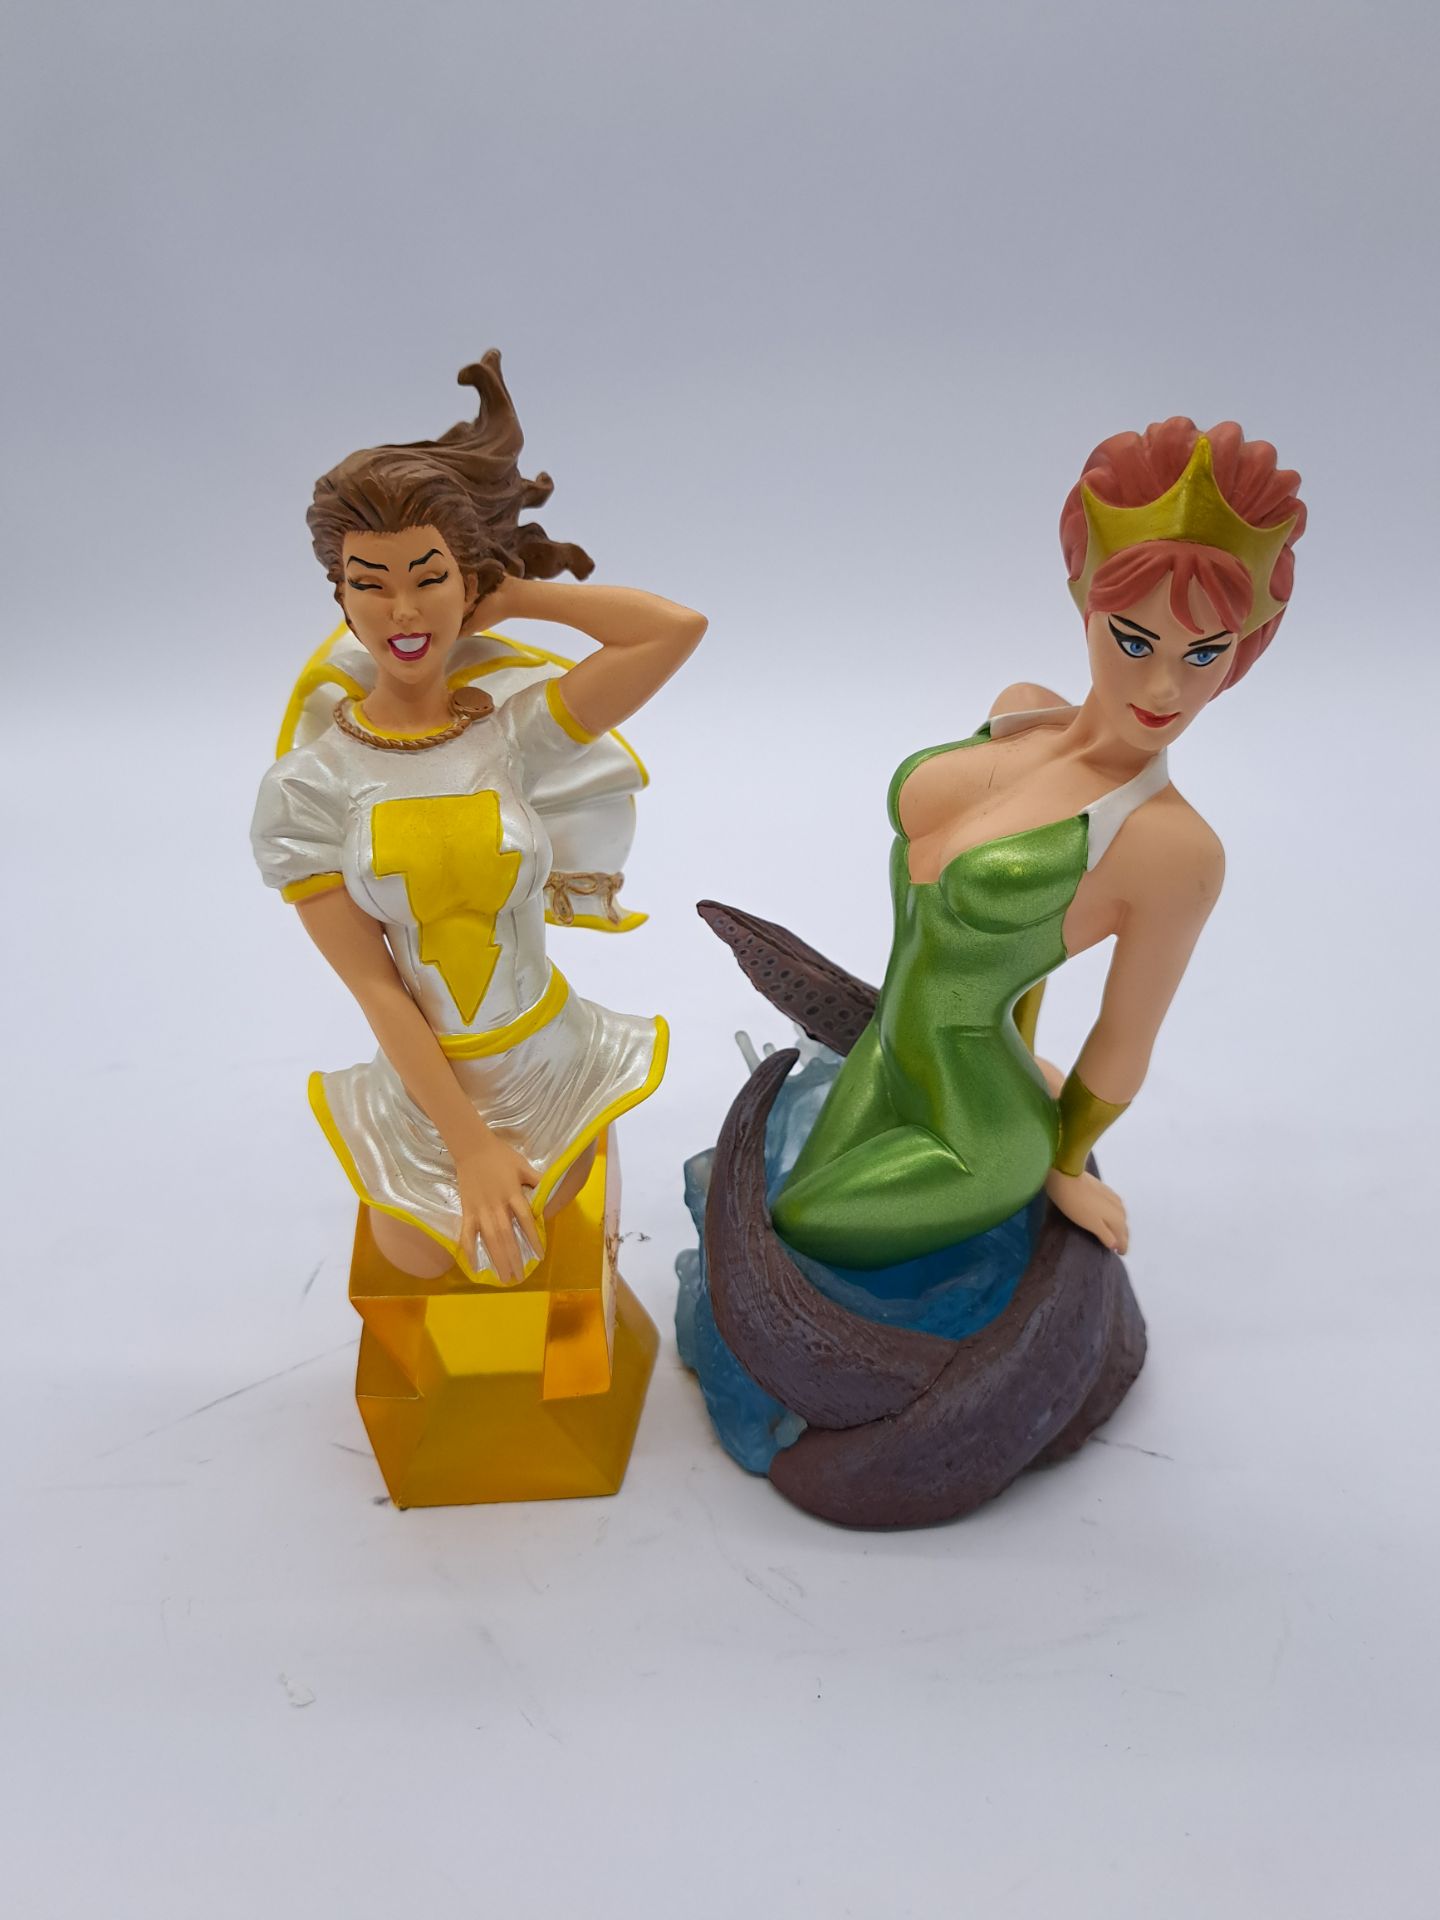 Women of the DC Universe Series 2 Mera Bust 0442 of 3000 & Shazam! Mary Bust 1701 of 3100 by DC D...